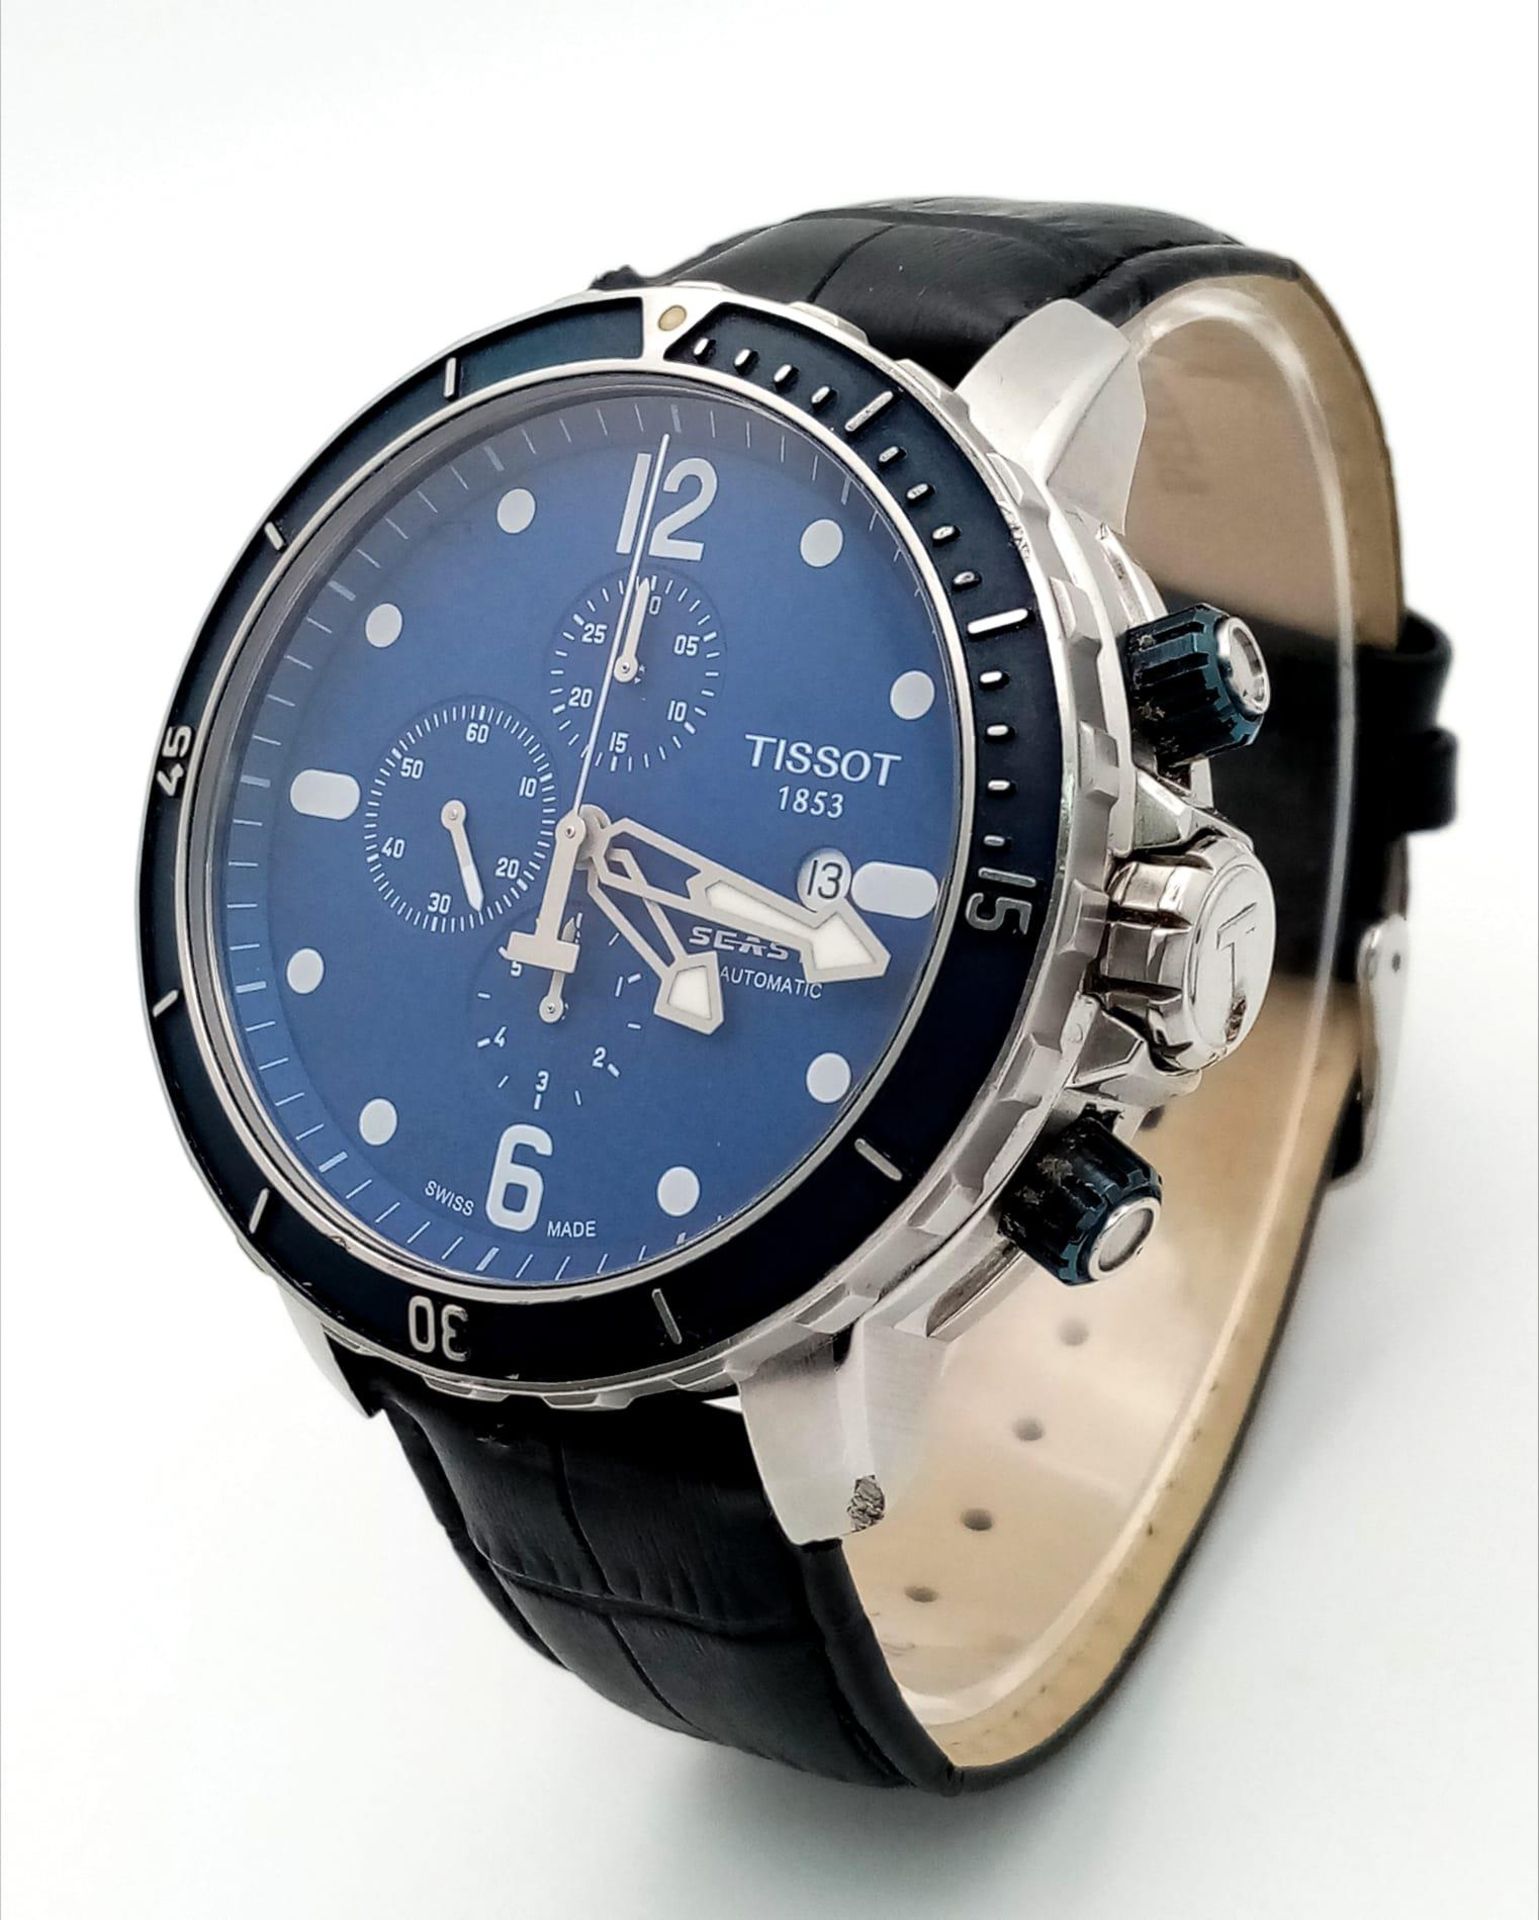 A Tissot Seastar Automatic Chronograph Gents Watch. Black leather strap. Stainless steel case - - Image 2 of 6